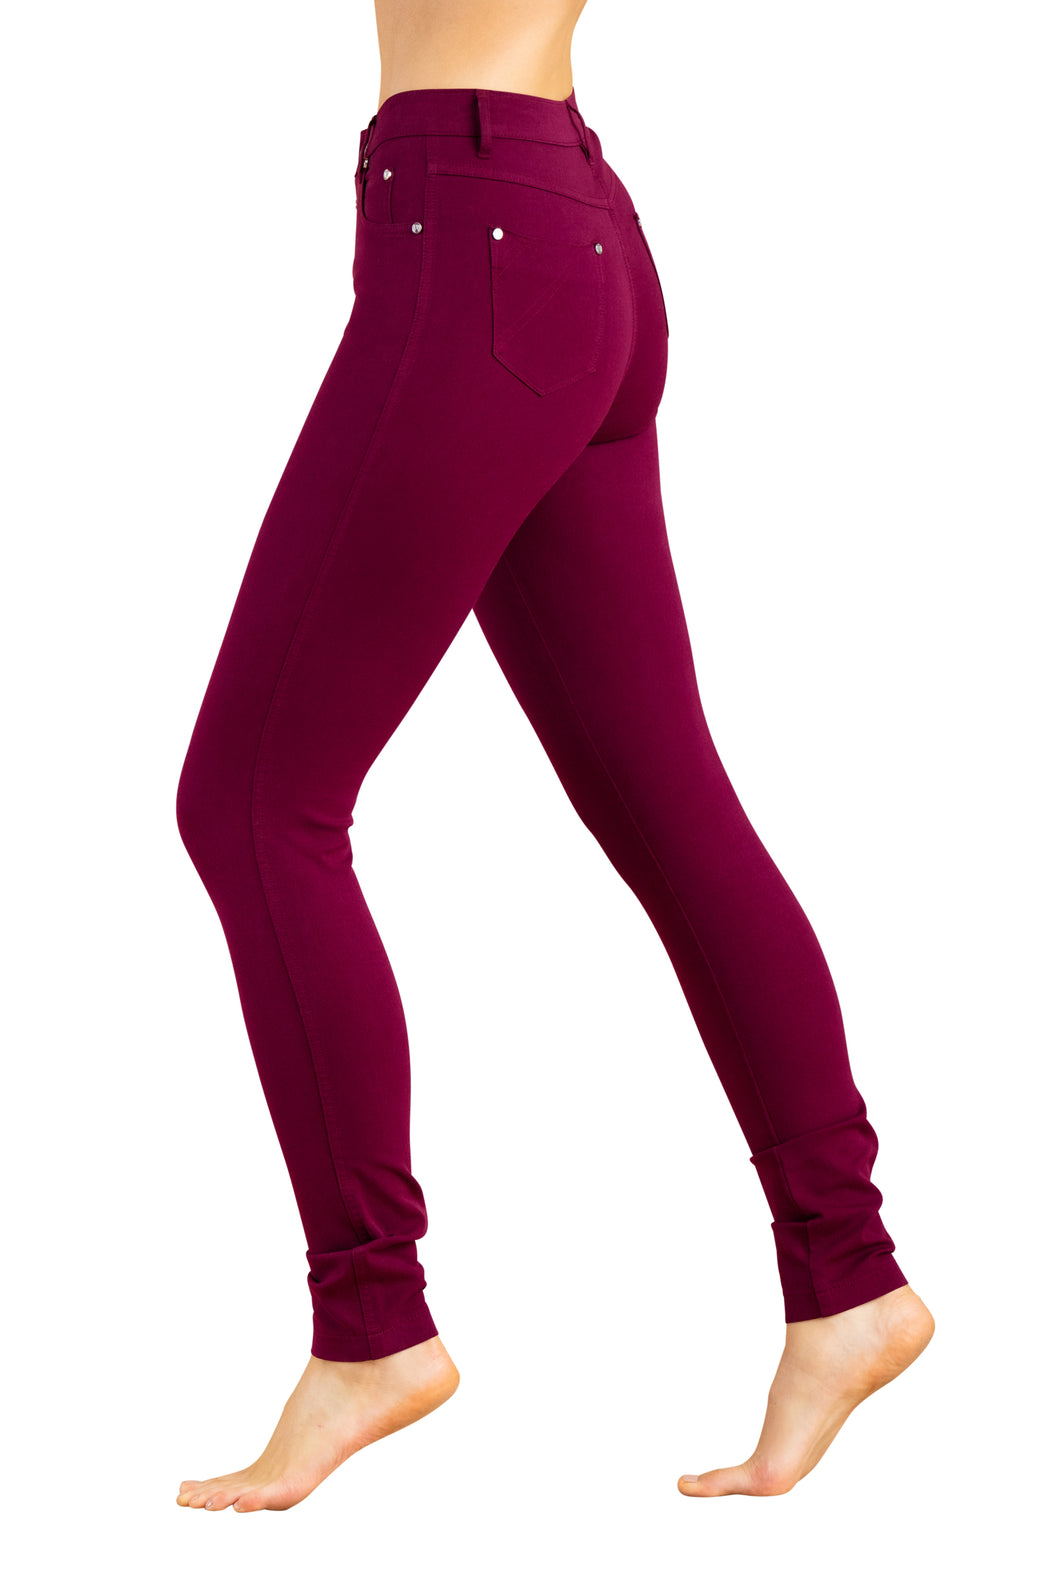 MARBLE FASHIONS 2402 JEANS COLOUR 205 - BERRY